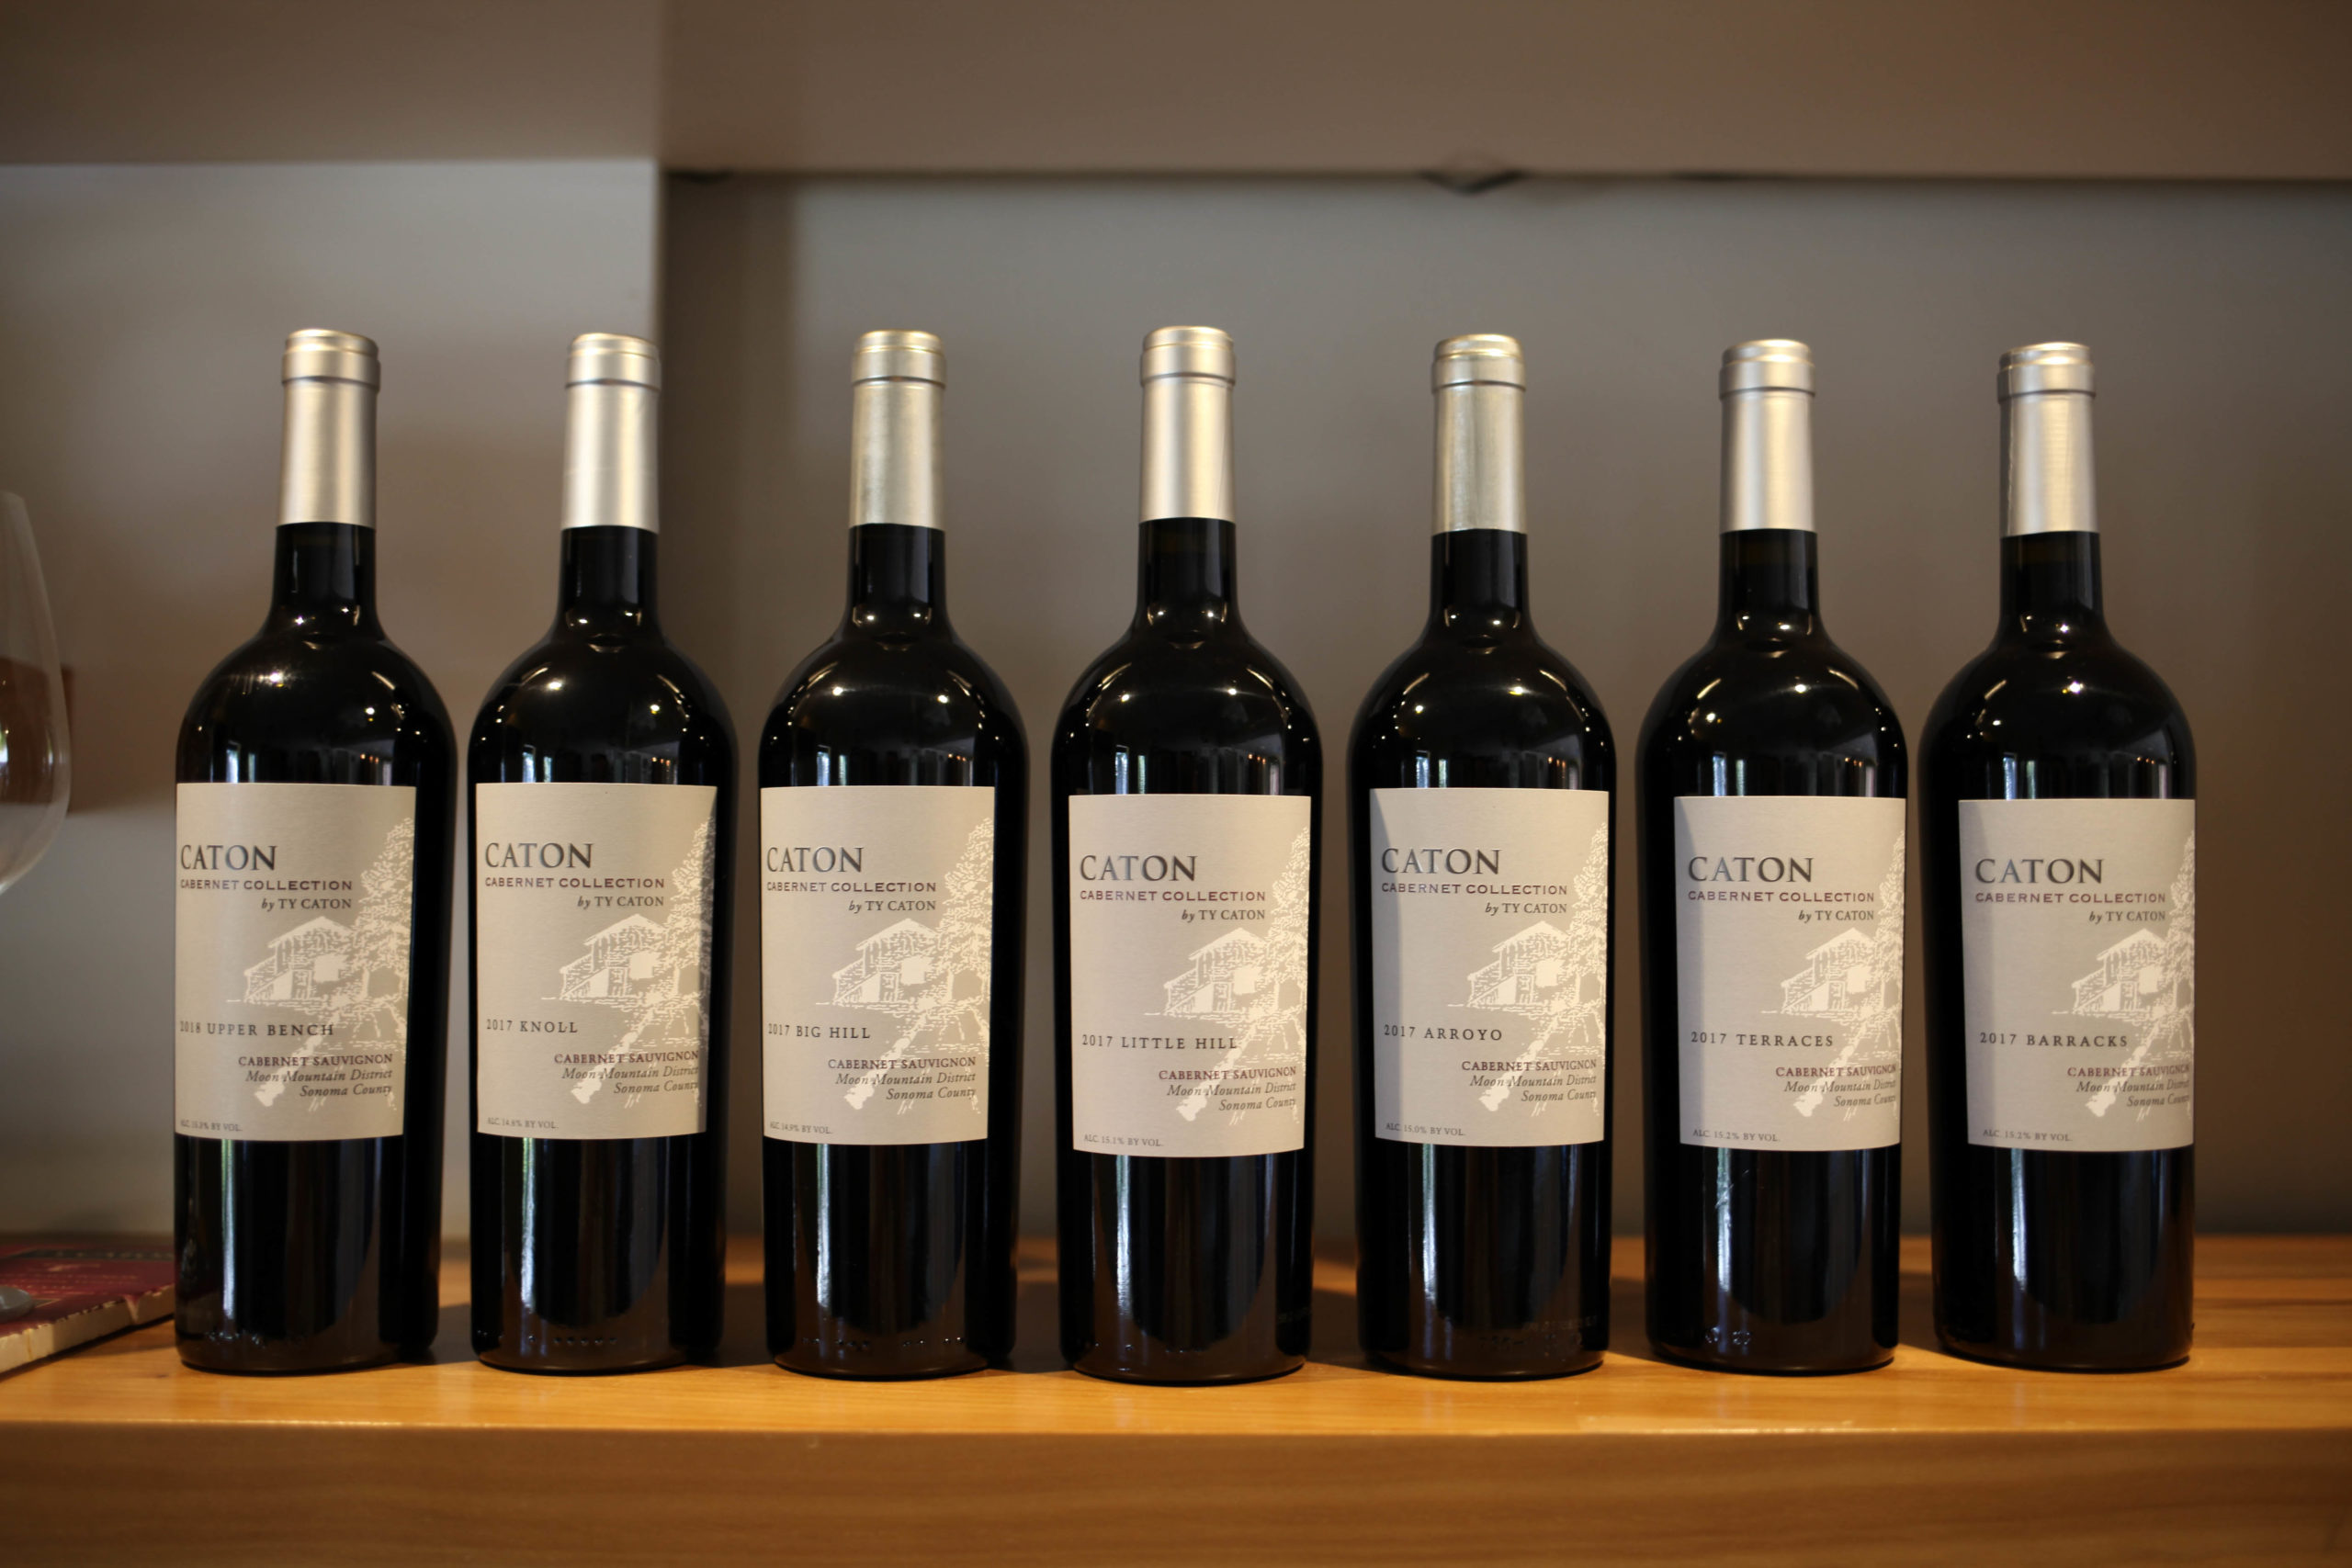 We are now offering tastings of our Current Release Caton Cabernet Collection Cabernet Sauvignons.